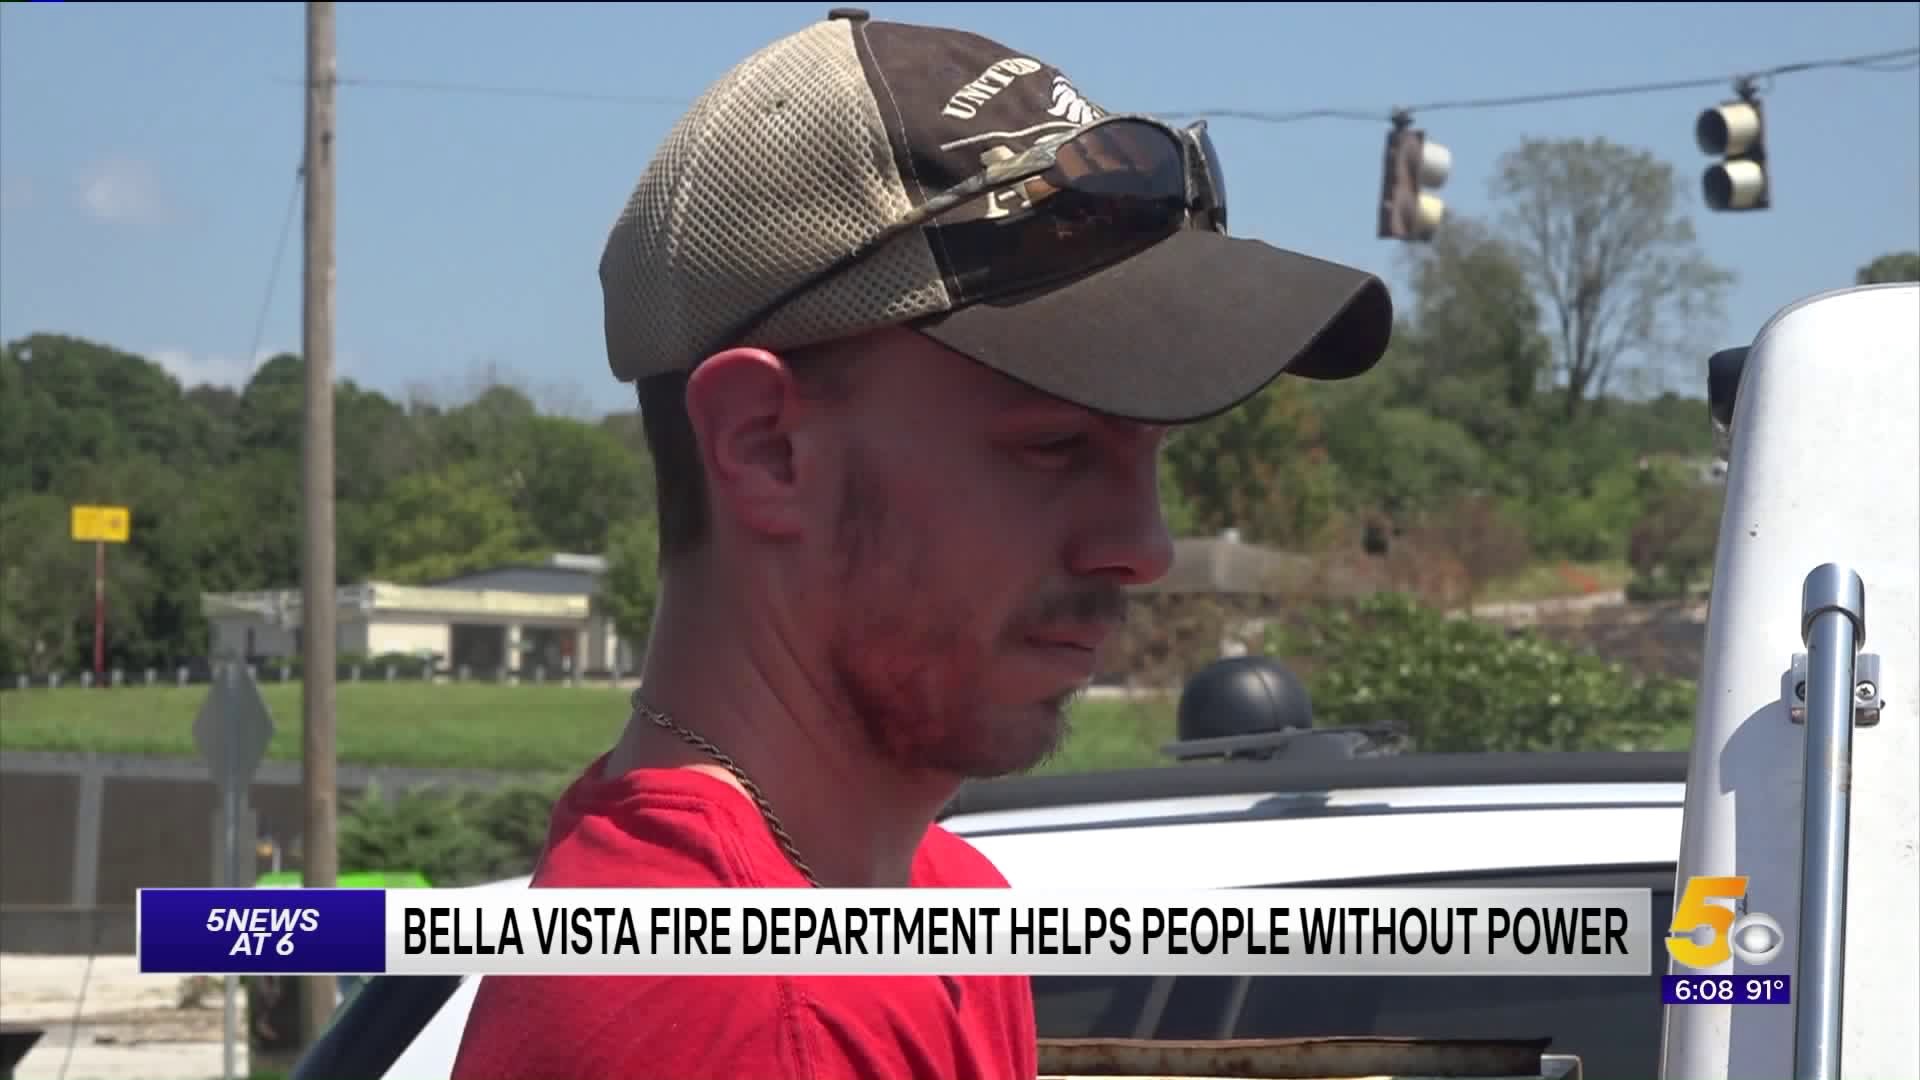 Bella Vista Fire Department Helps People Without Power